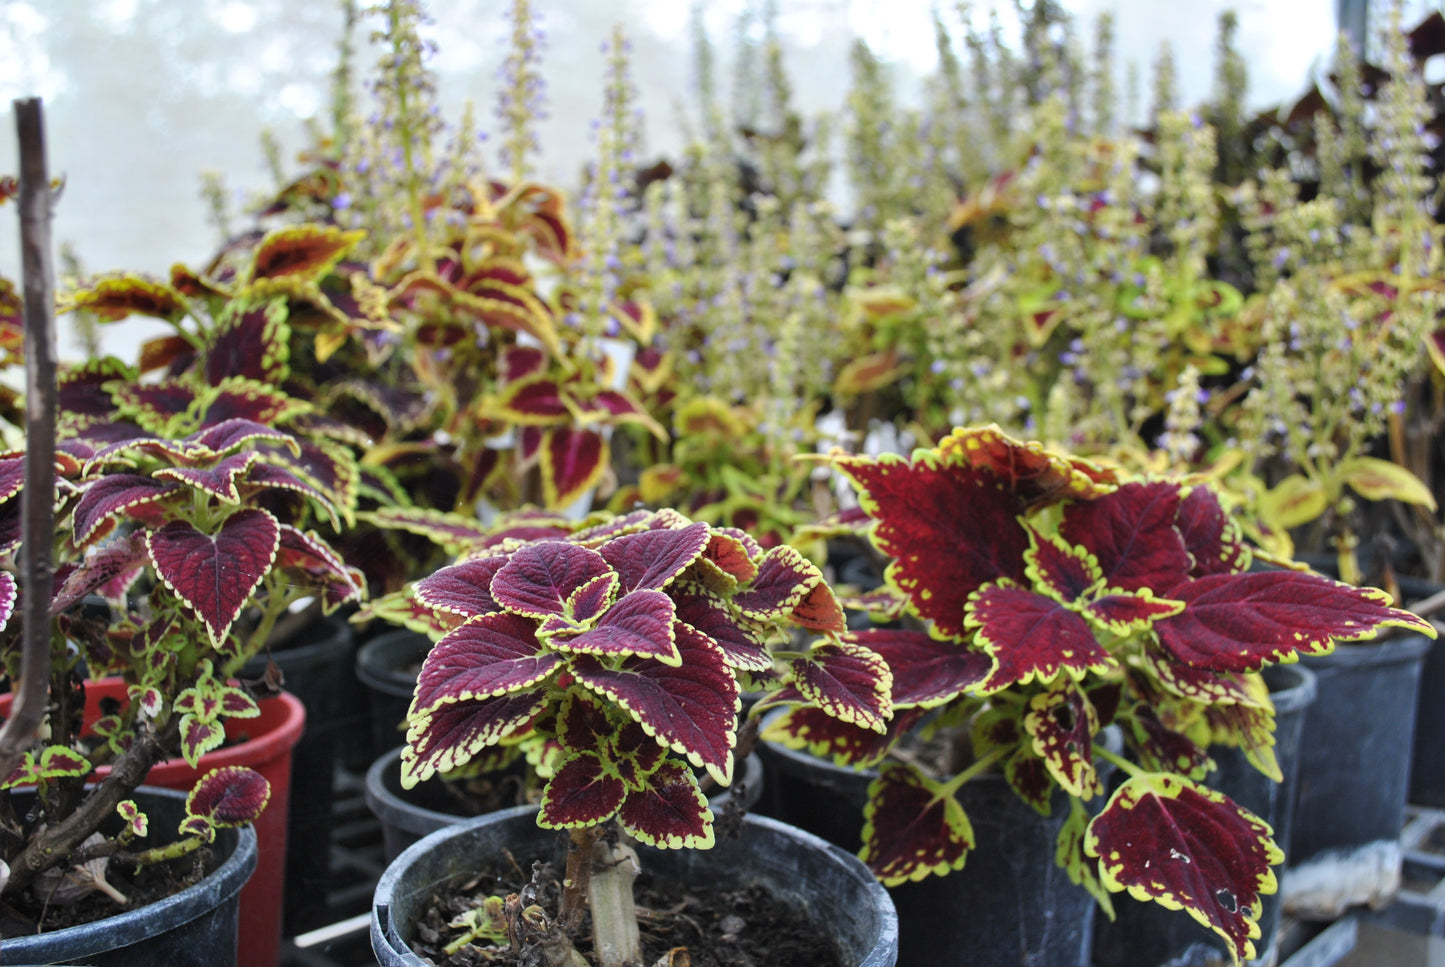 Colourful variety of Coleus plants with purple stemmed flowers in the background and varying shades of red and green foliage